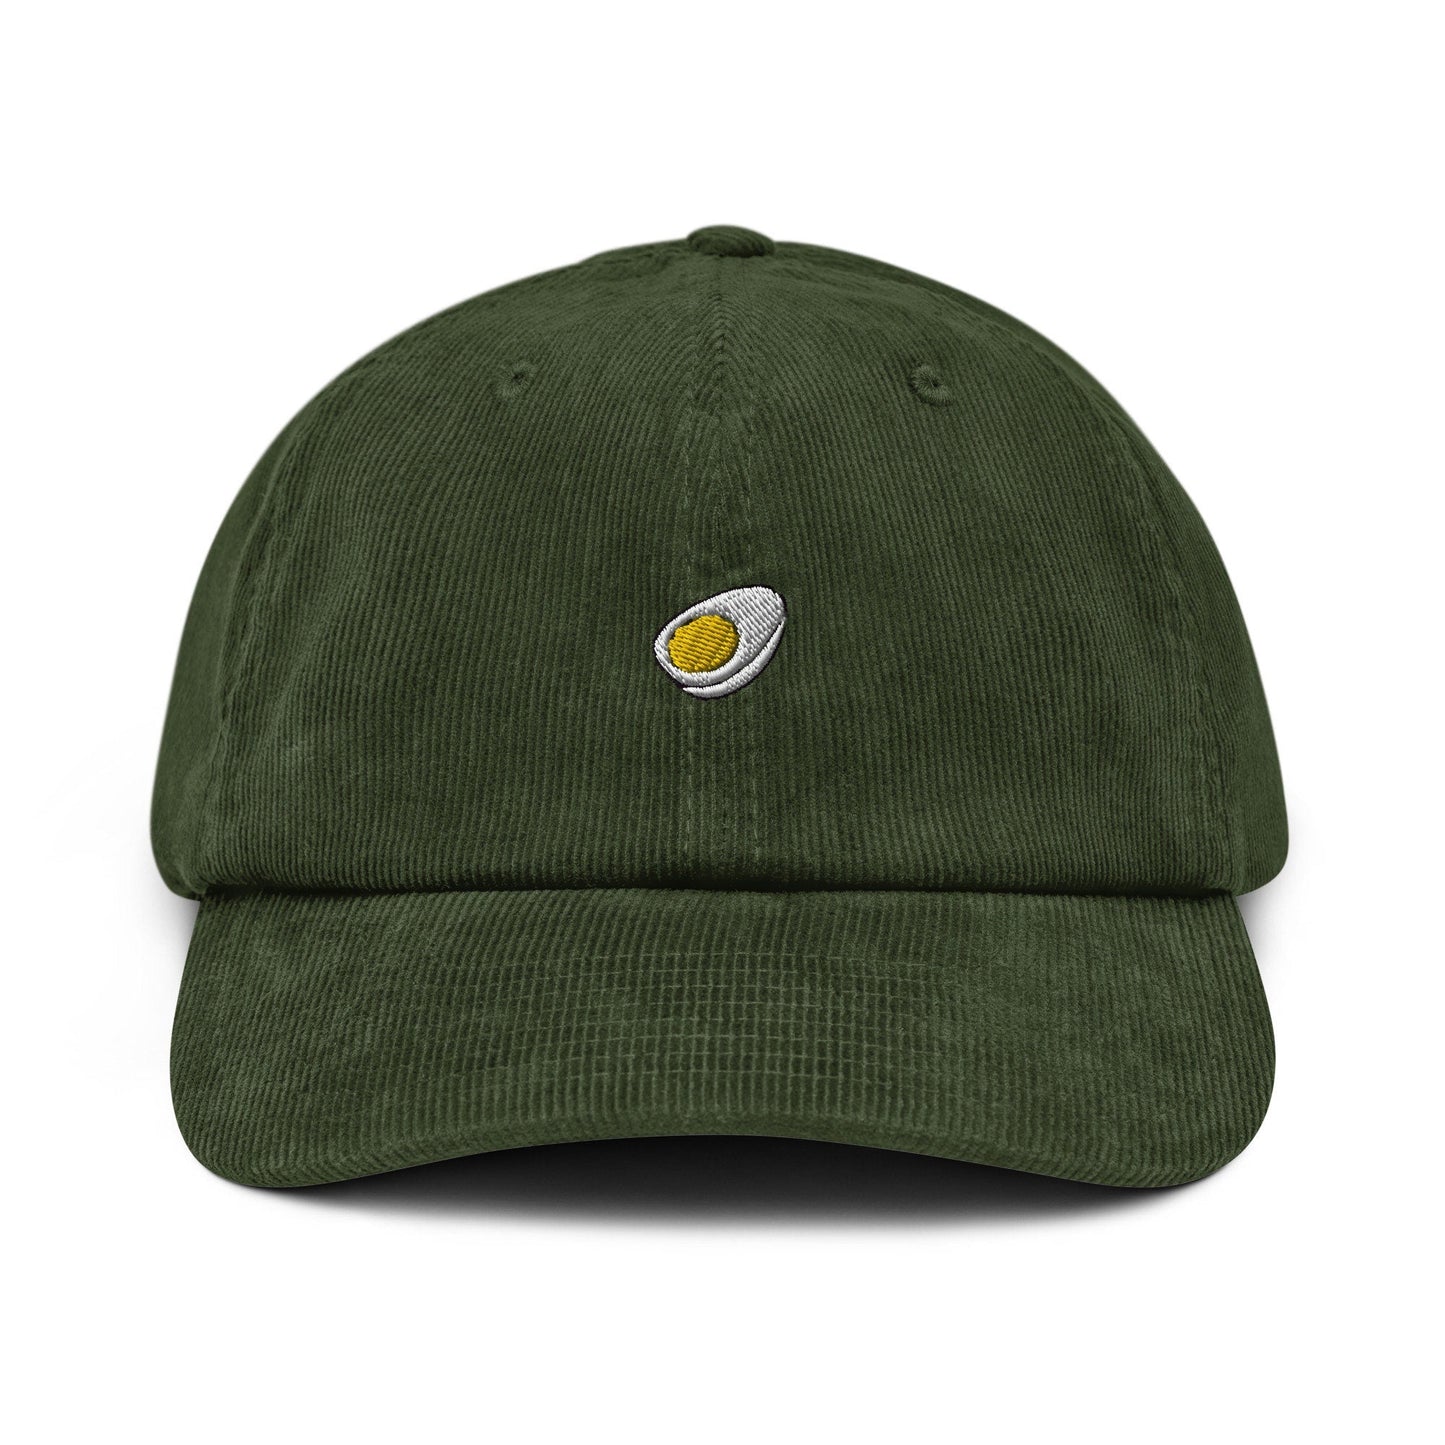 Egg Dad Hat - Gift for Breakfast Egg Lovers and Chefs - Embroidered Corduroy Cap - Evilwater Originals